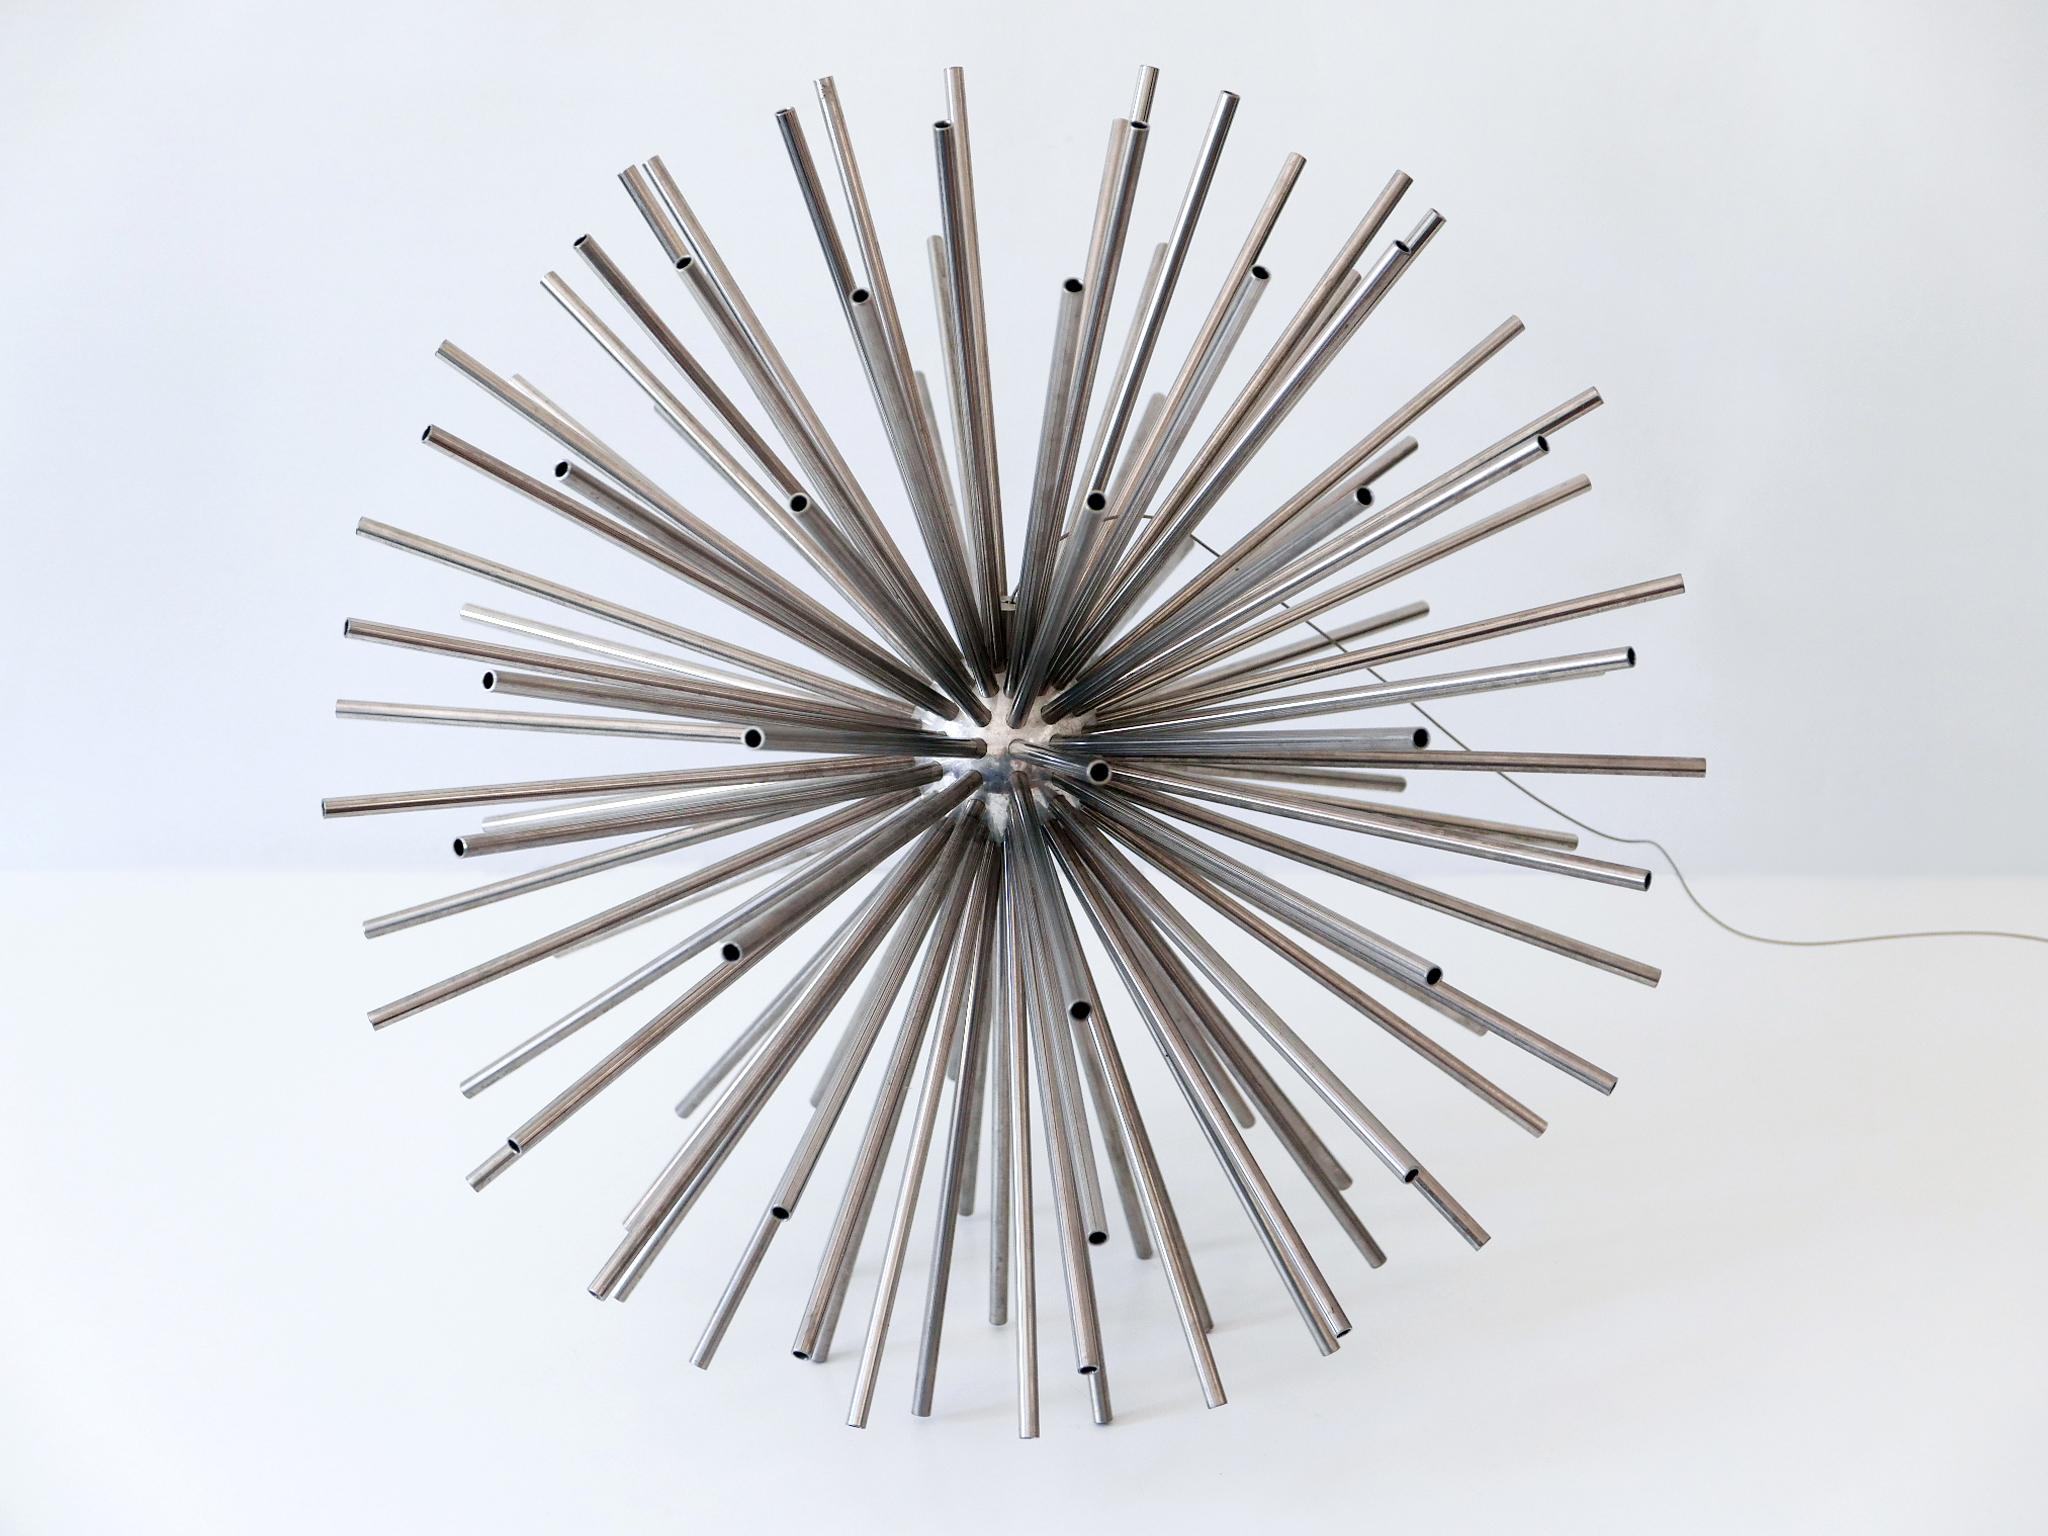 Exceptional and highly decorative Mid-Century Modern sculpture or decorative object »Asteroid«, »Sea Urchin« or »Sunburst«. Designed by Jerry Fels & Curtis Freiler for Curtis Jere, USA, 1970s.

Executed in aluminium rods, the sculpture can be